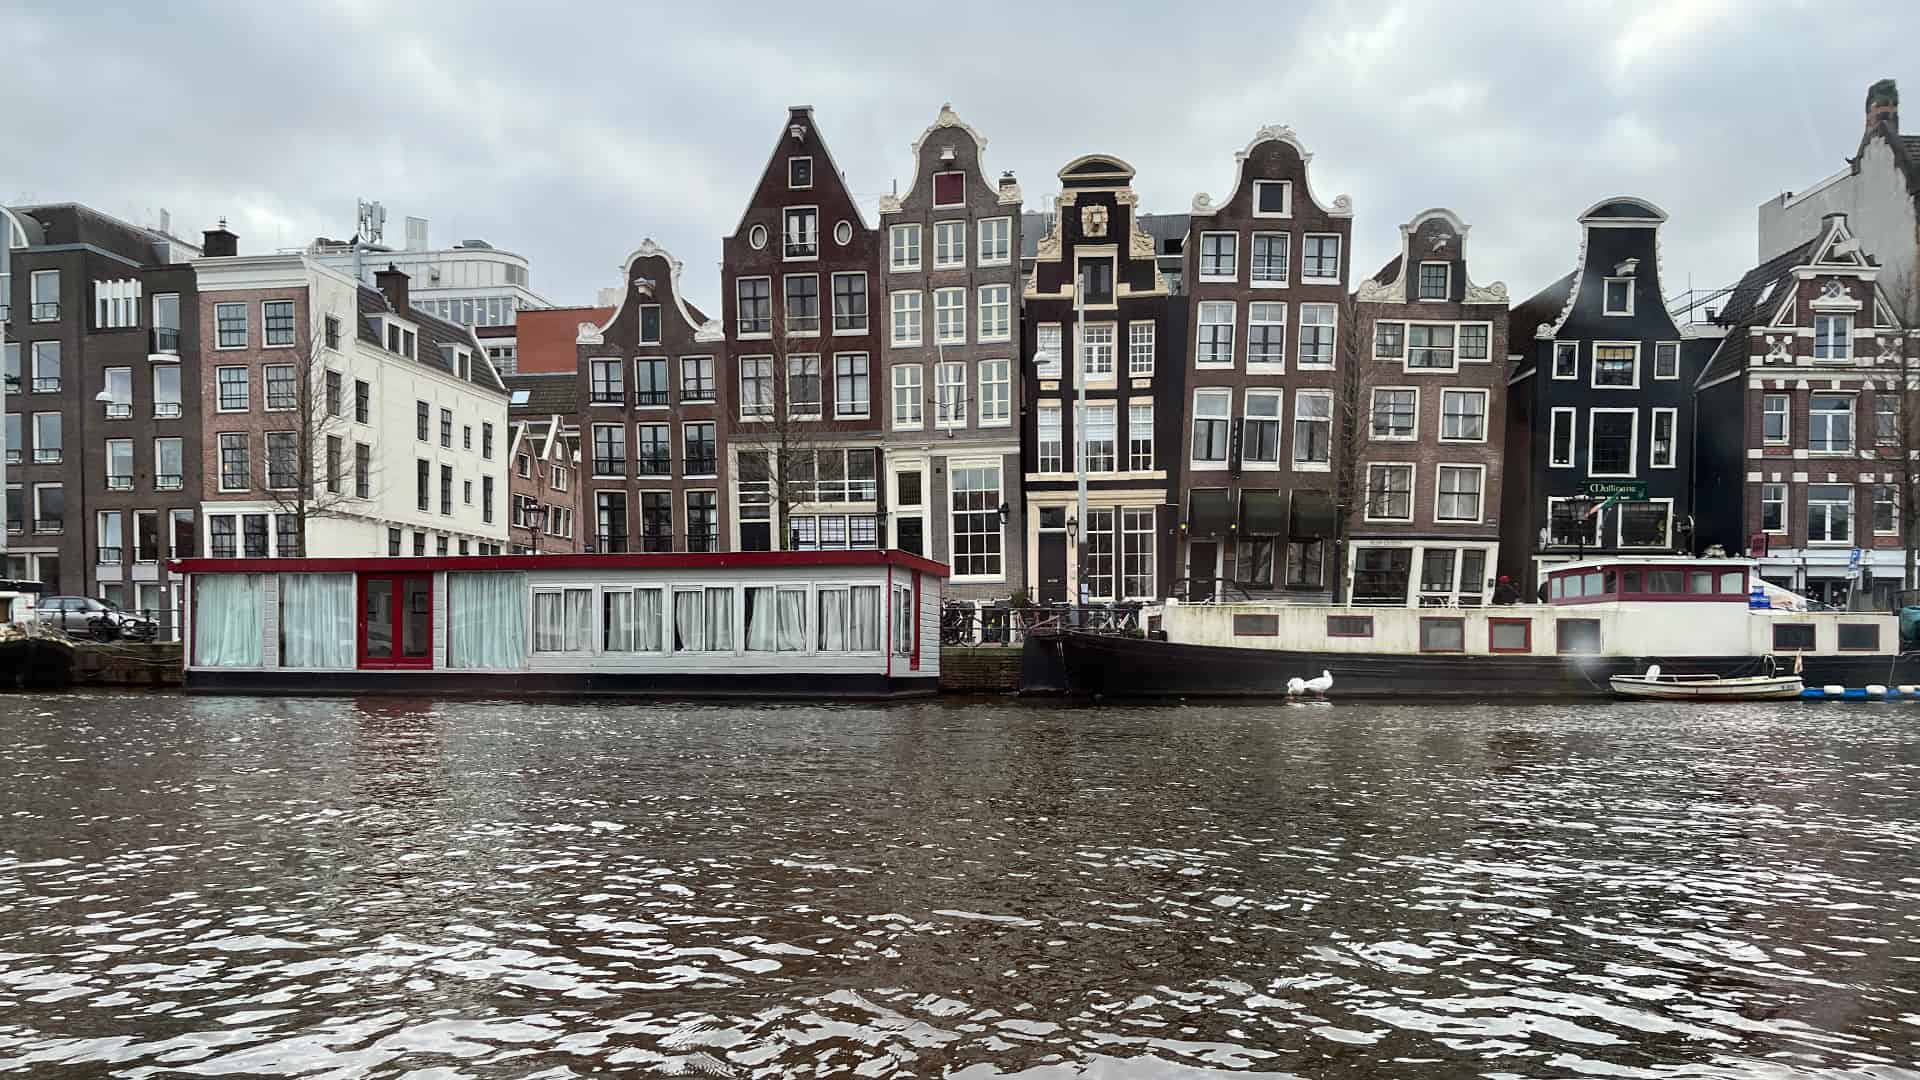 View of Amsterdam architecture from the boat tour